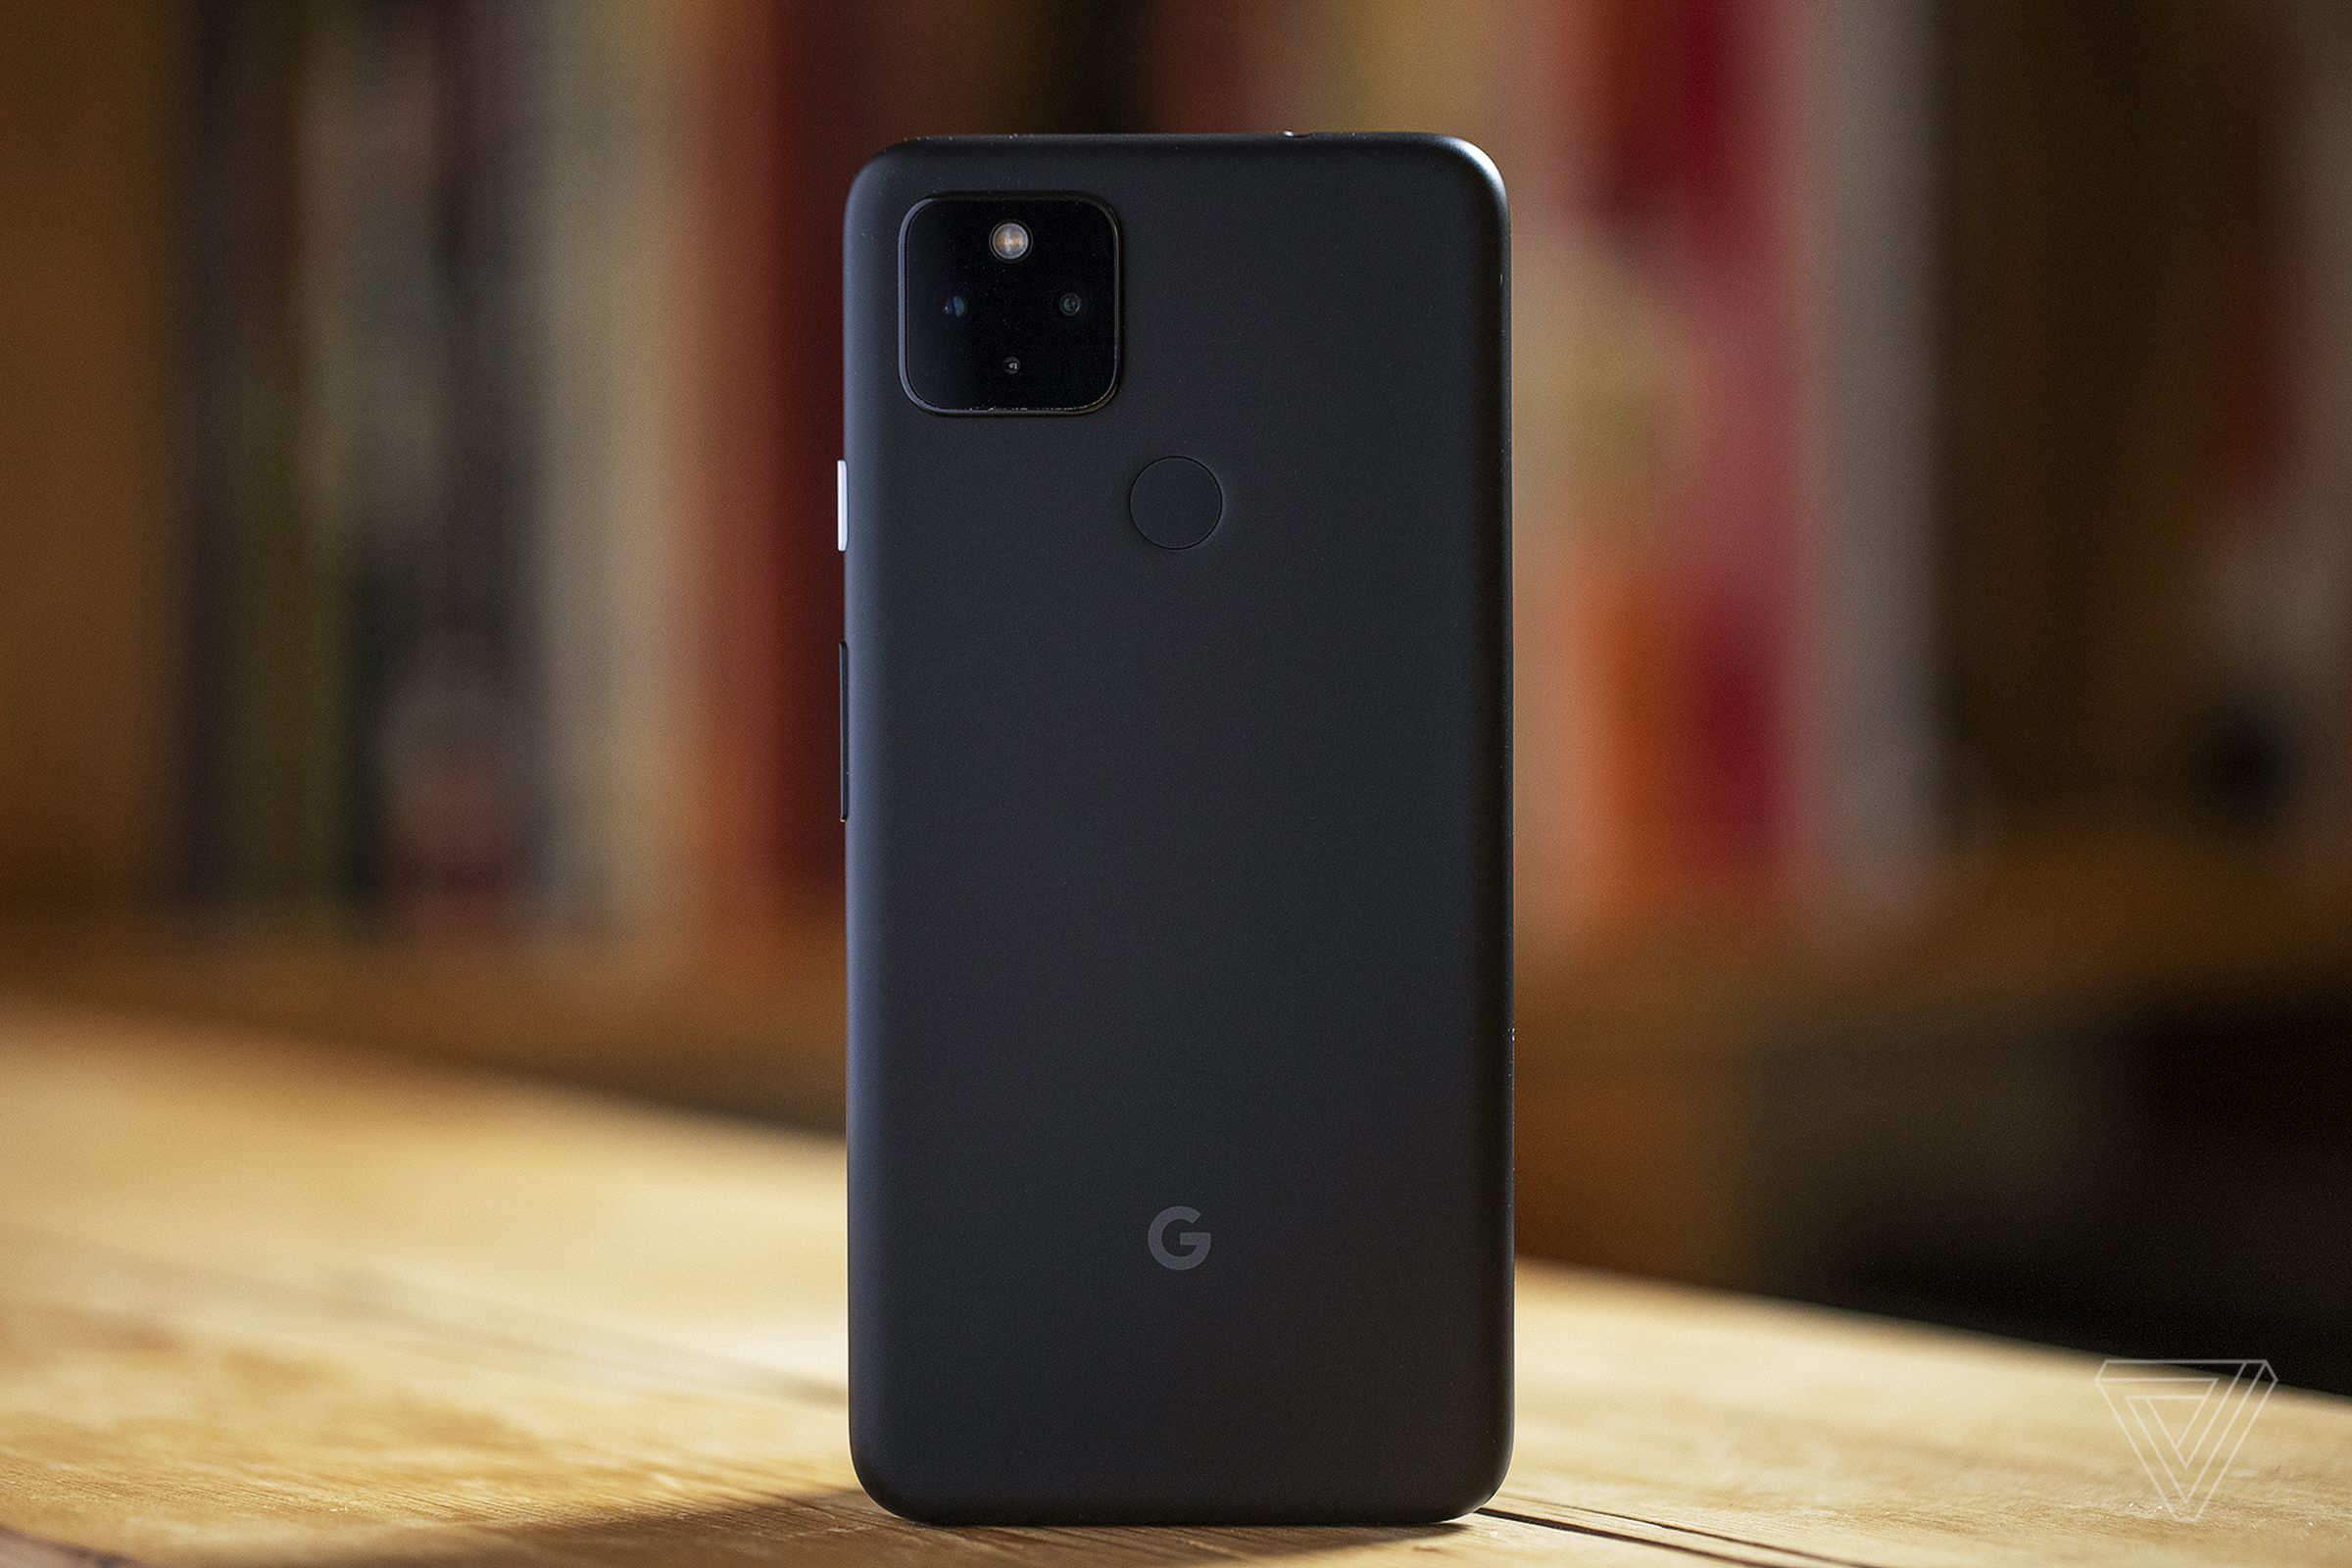 The Pixel 4A 5G has a plastic body